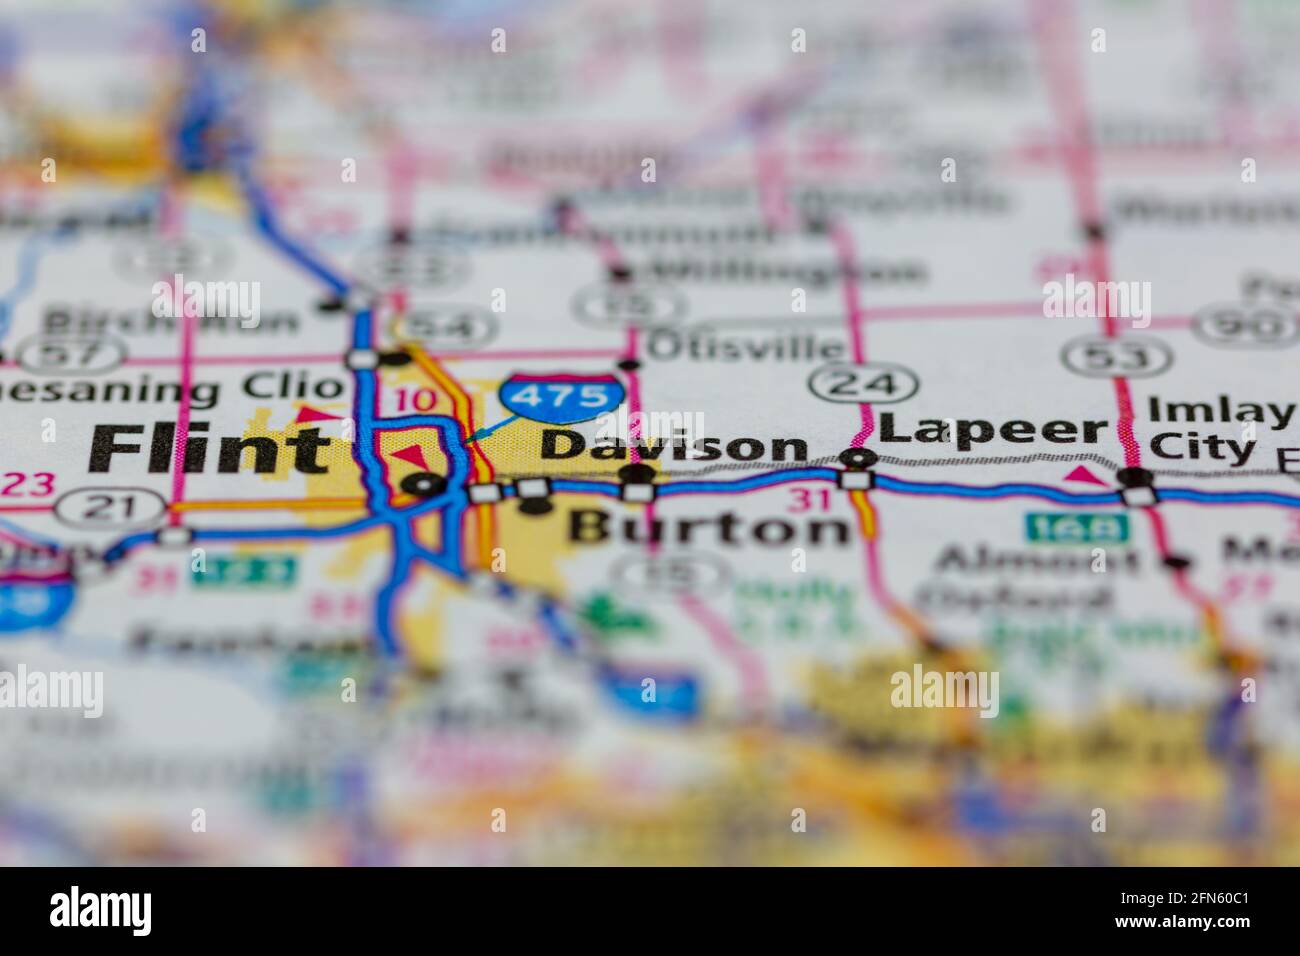 Davison Michigan Usa Shown On A Geography Map Or Road Map 2FN60C1 